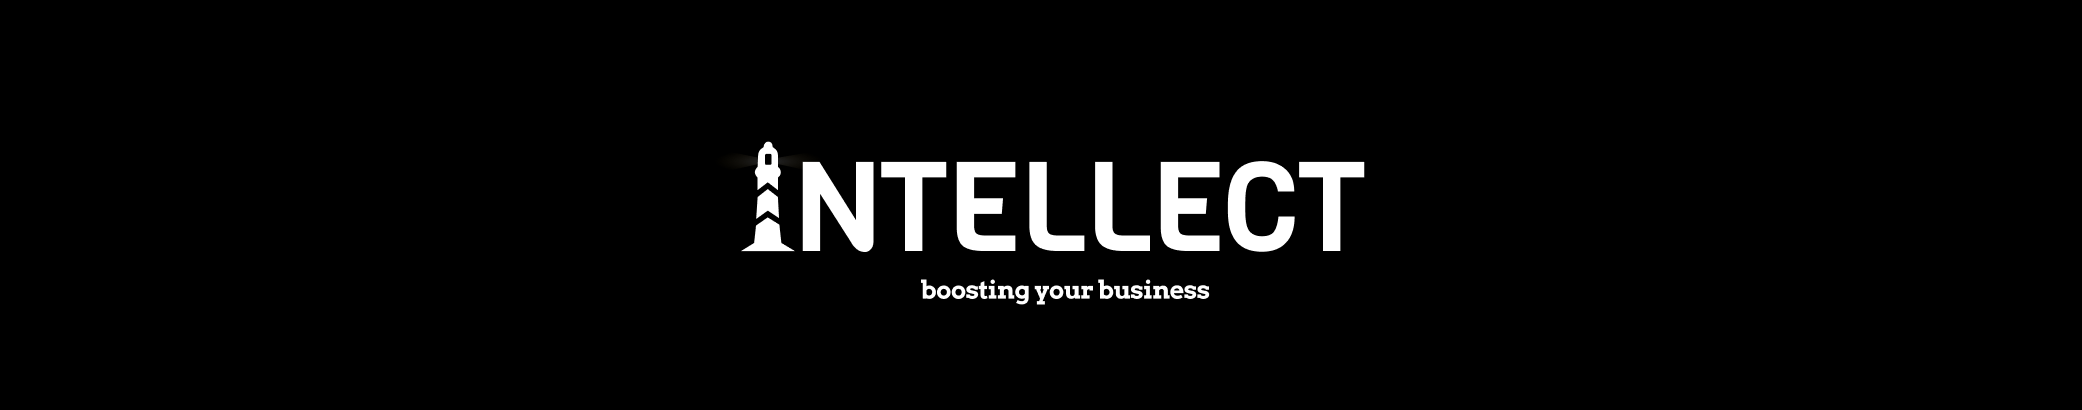 Intellect .'s profile banner